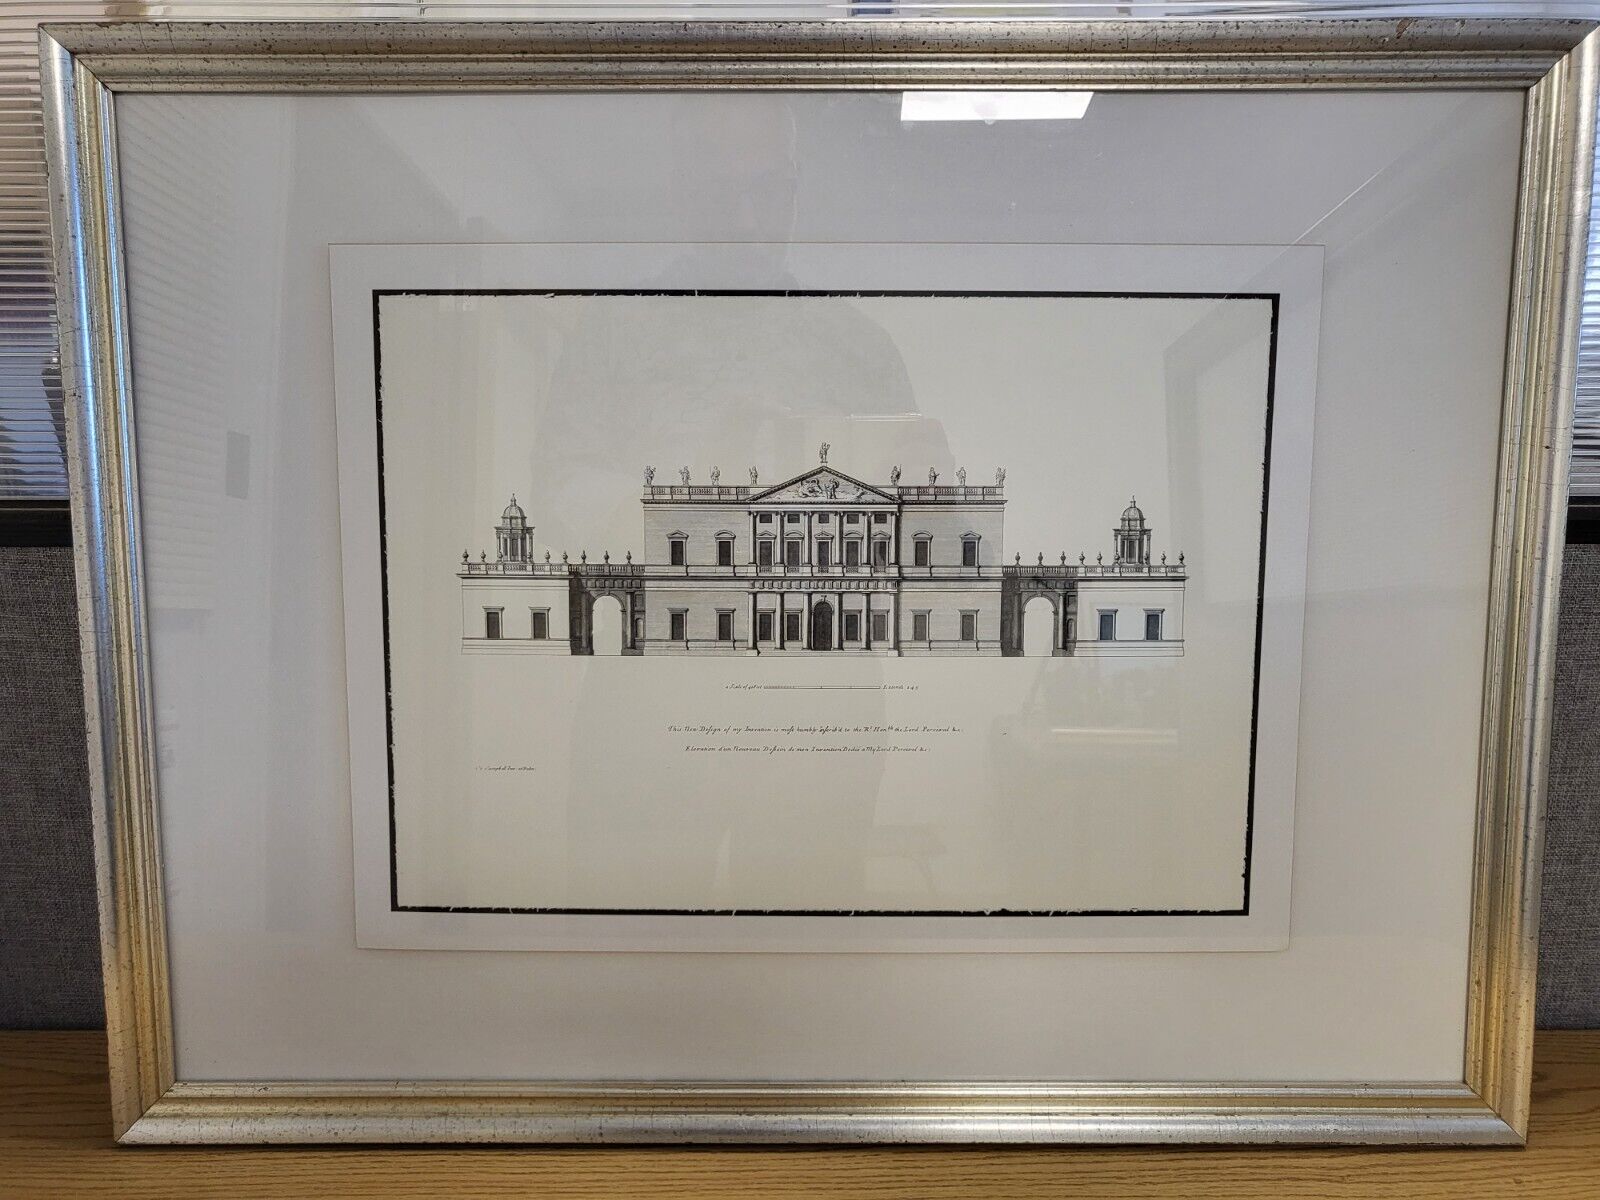 18th Century Architectural Engraving from Vitruvius Britannicus Colin Campbell